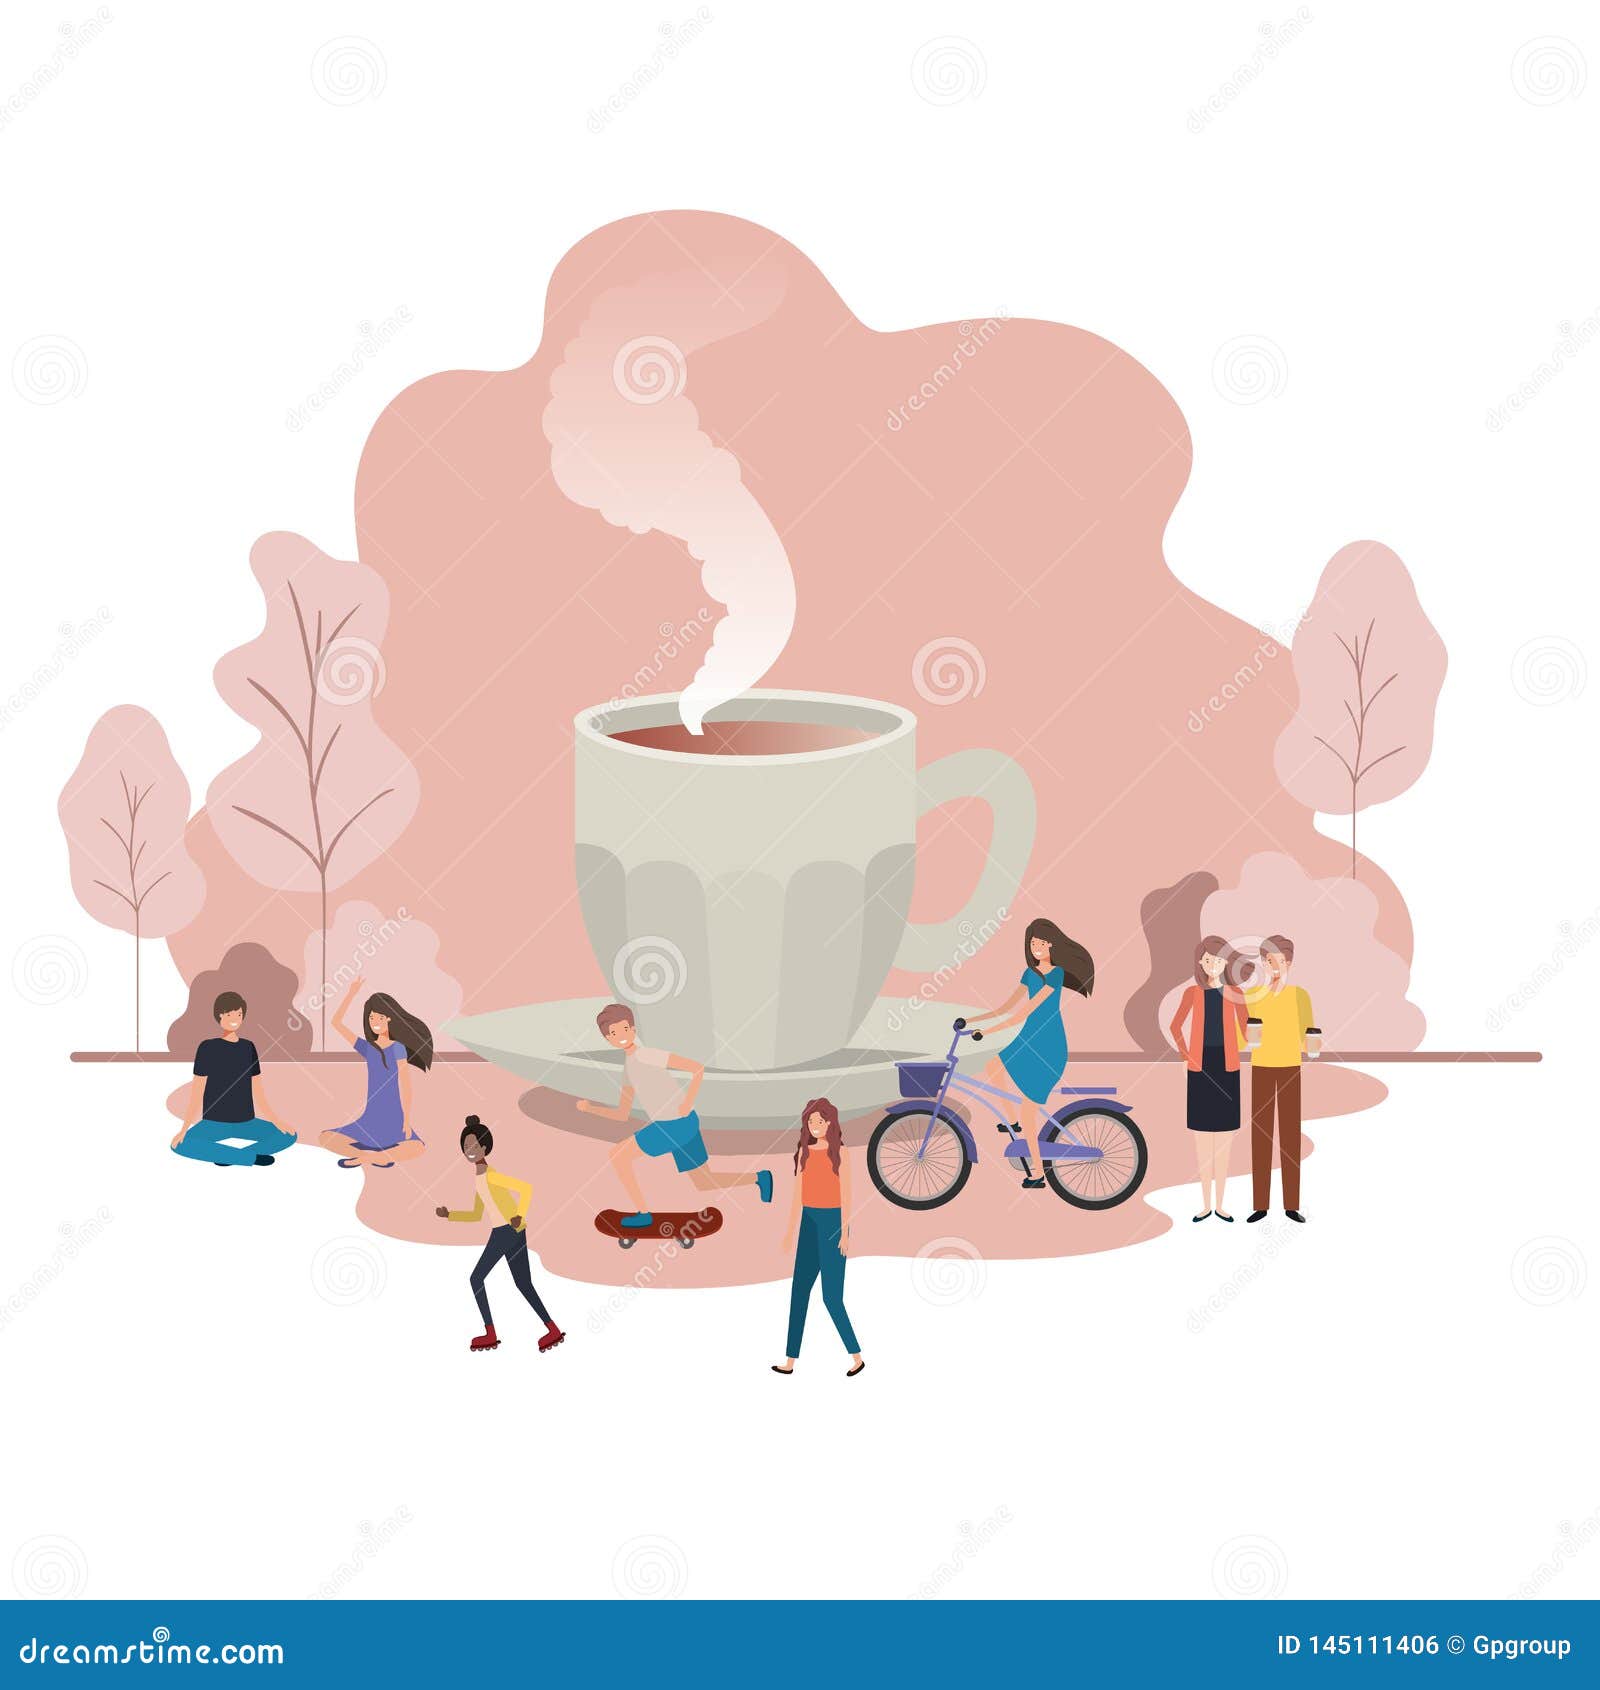 group of people cup of coffee avatar character